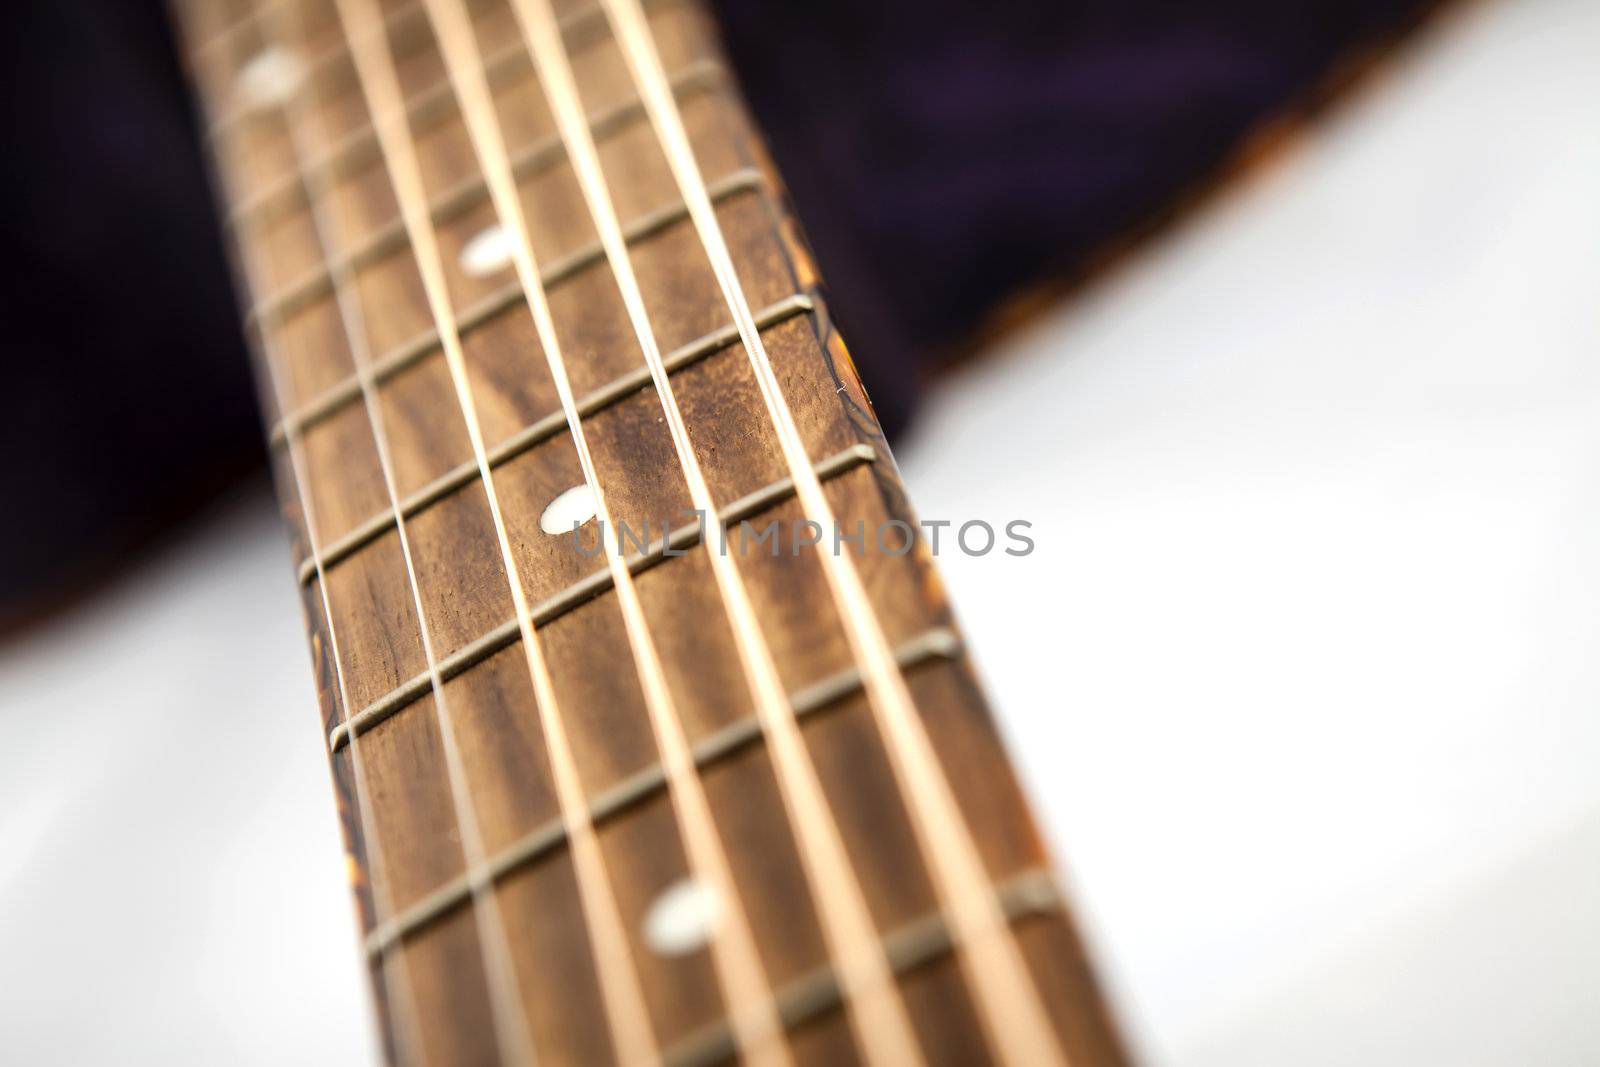 Acoustic Electric by PhotoWorks